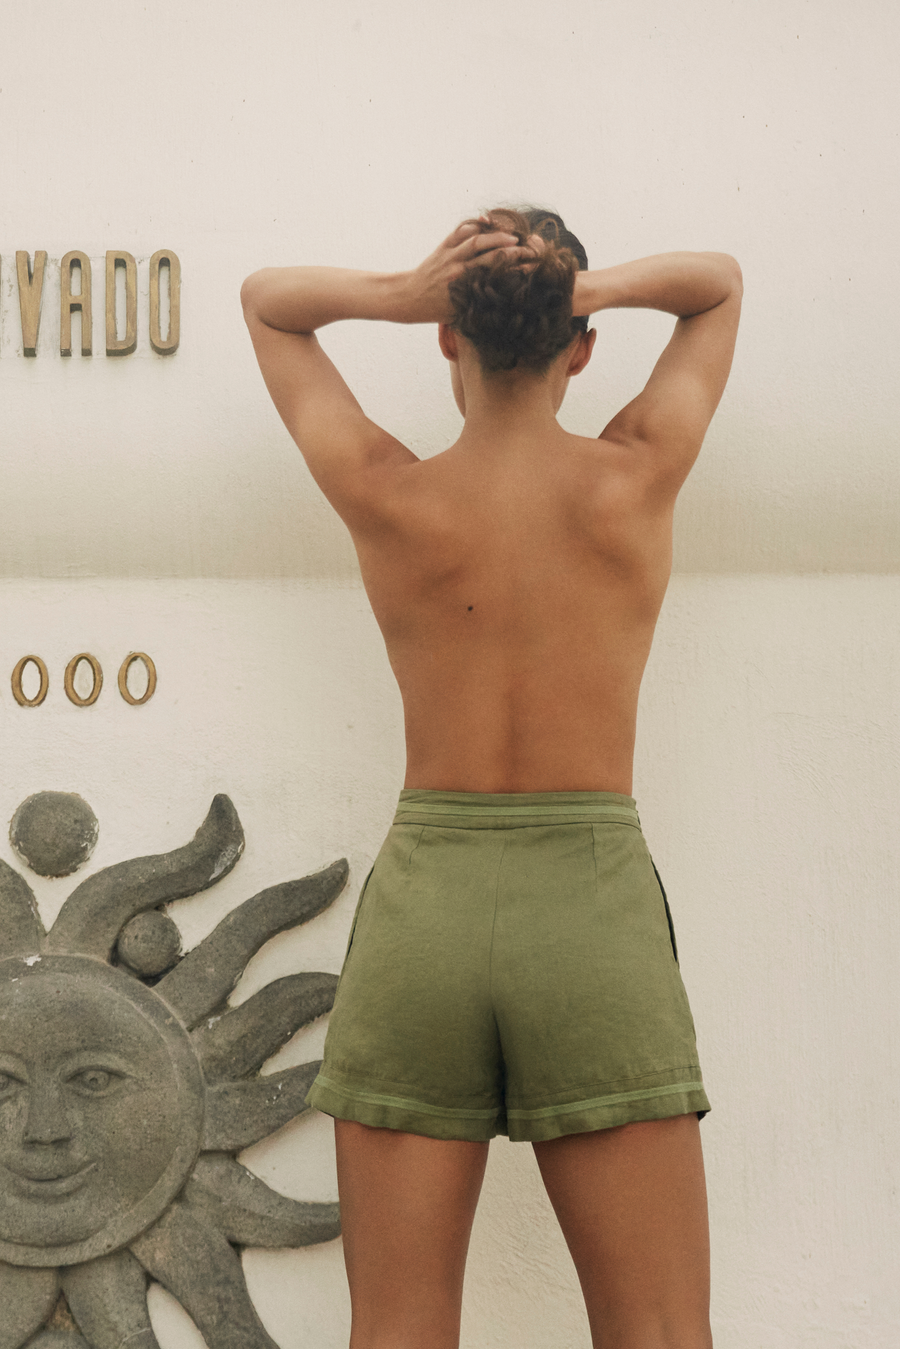 'Hippie Olive' Shorts Reloaded